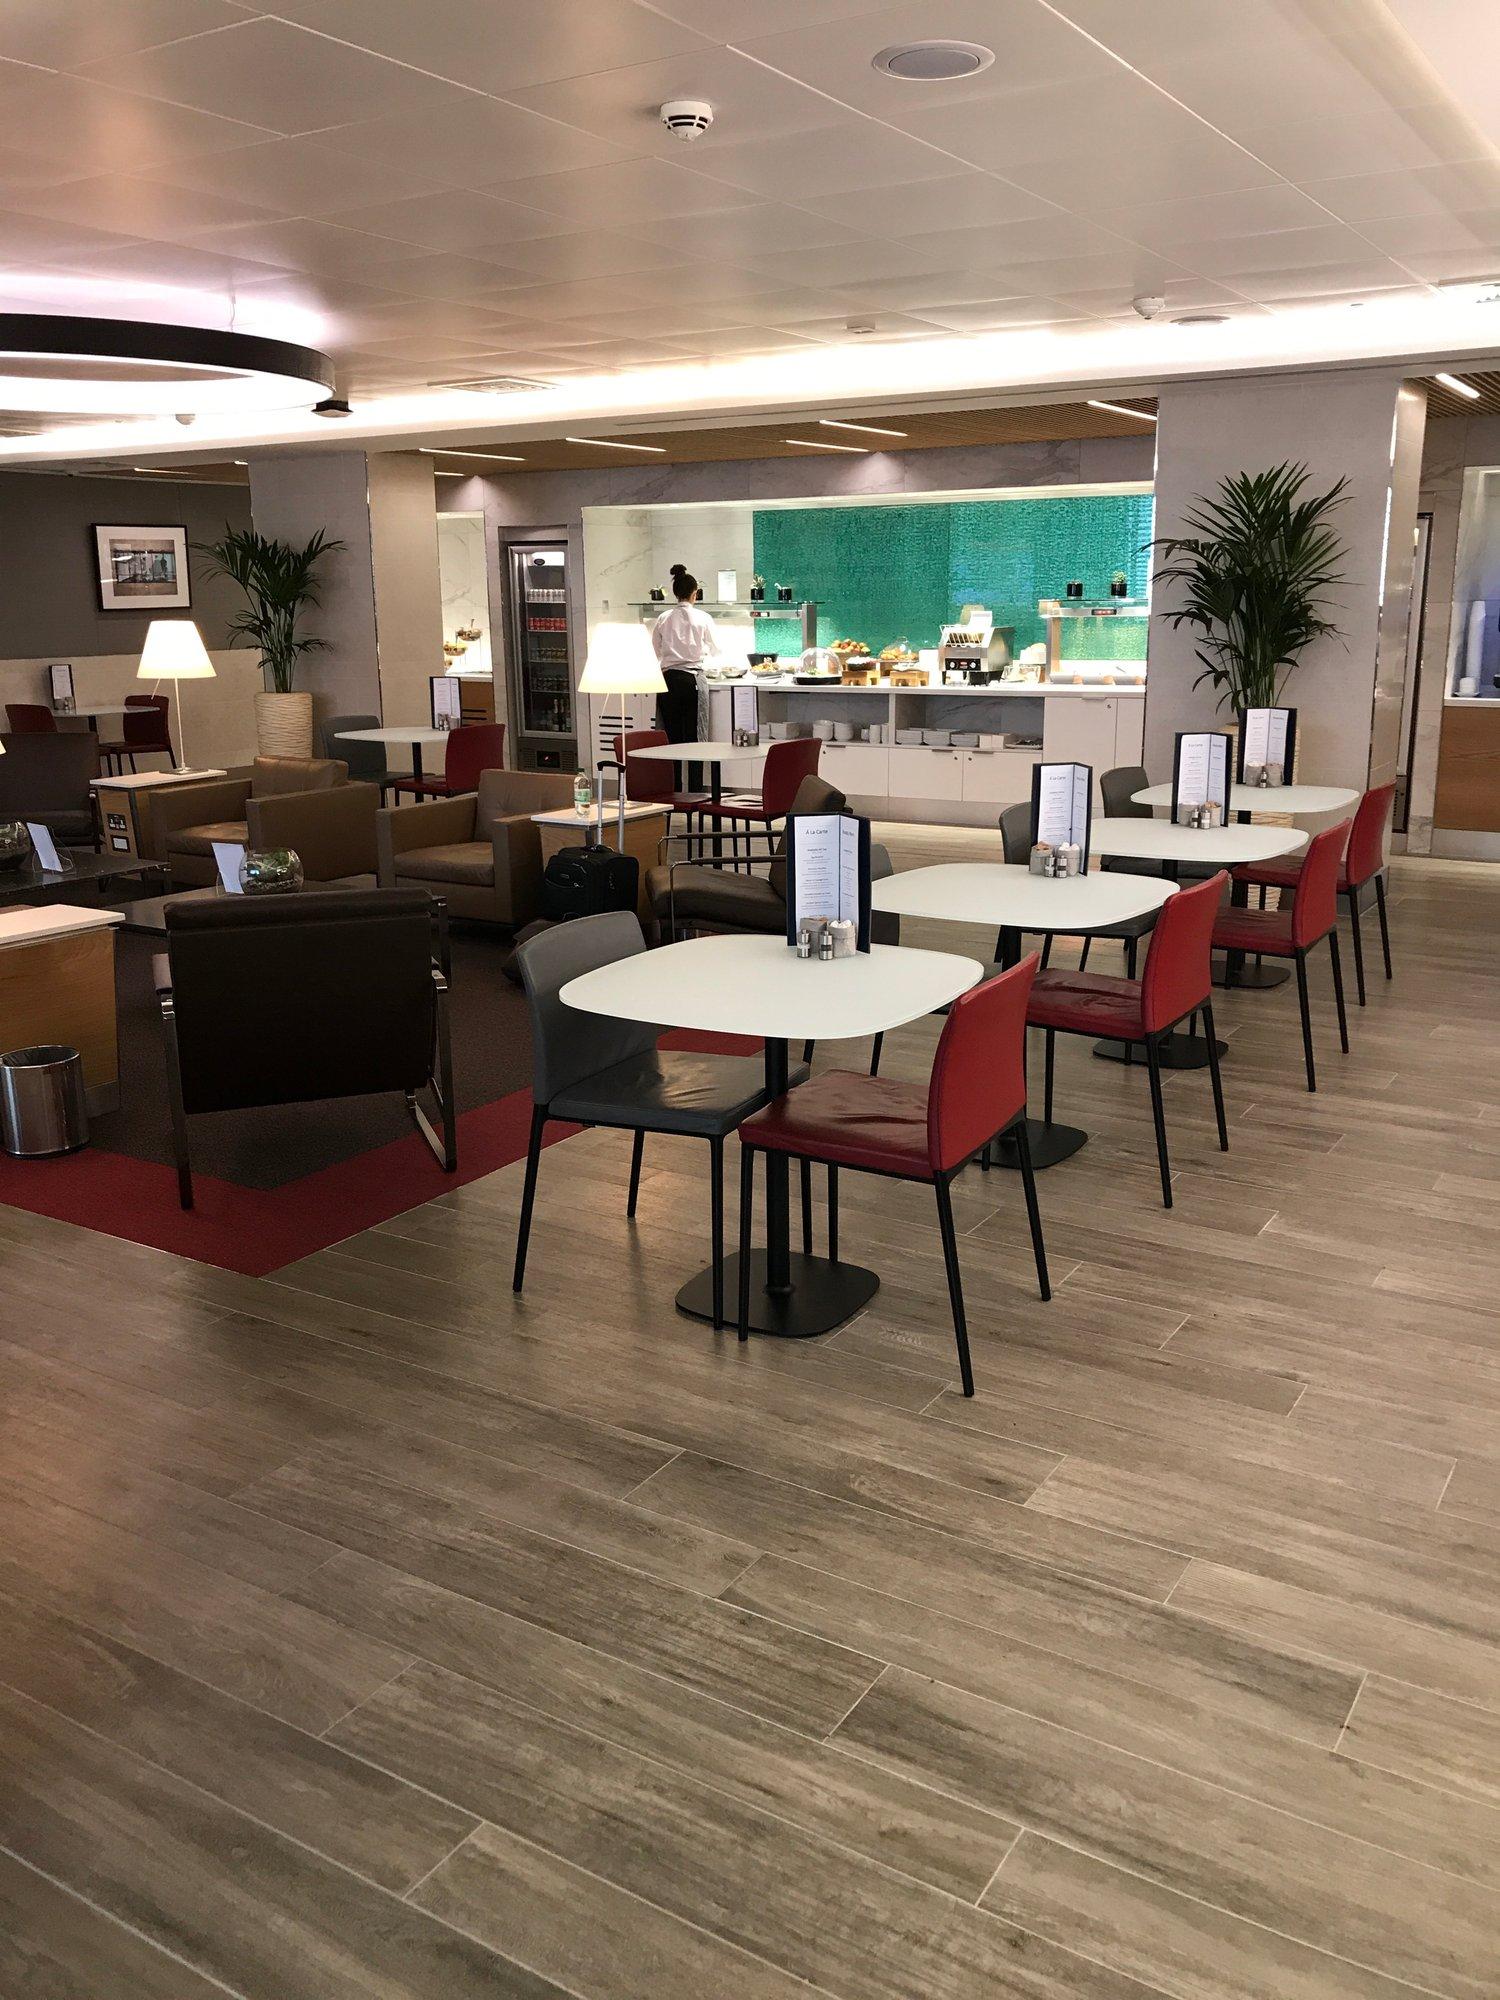 American Airlines Arrivals Lounge image 6 of 10